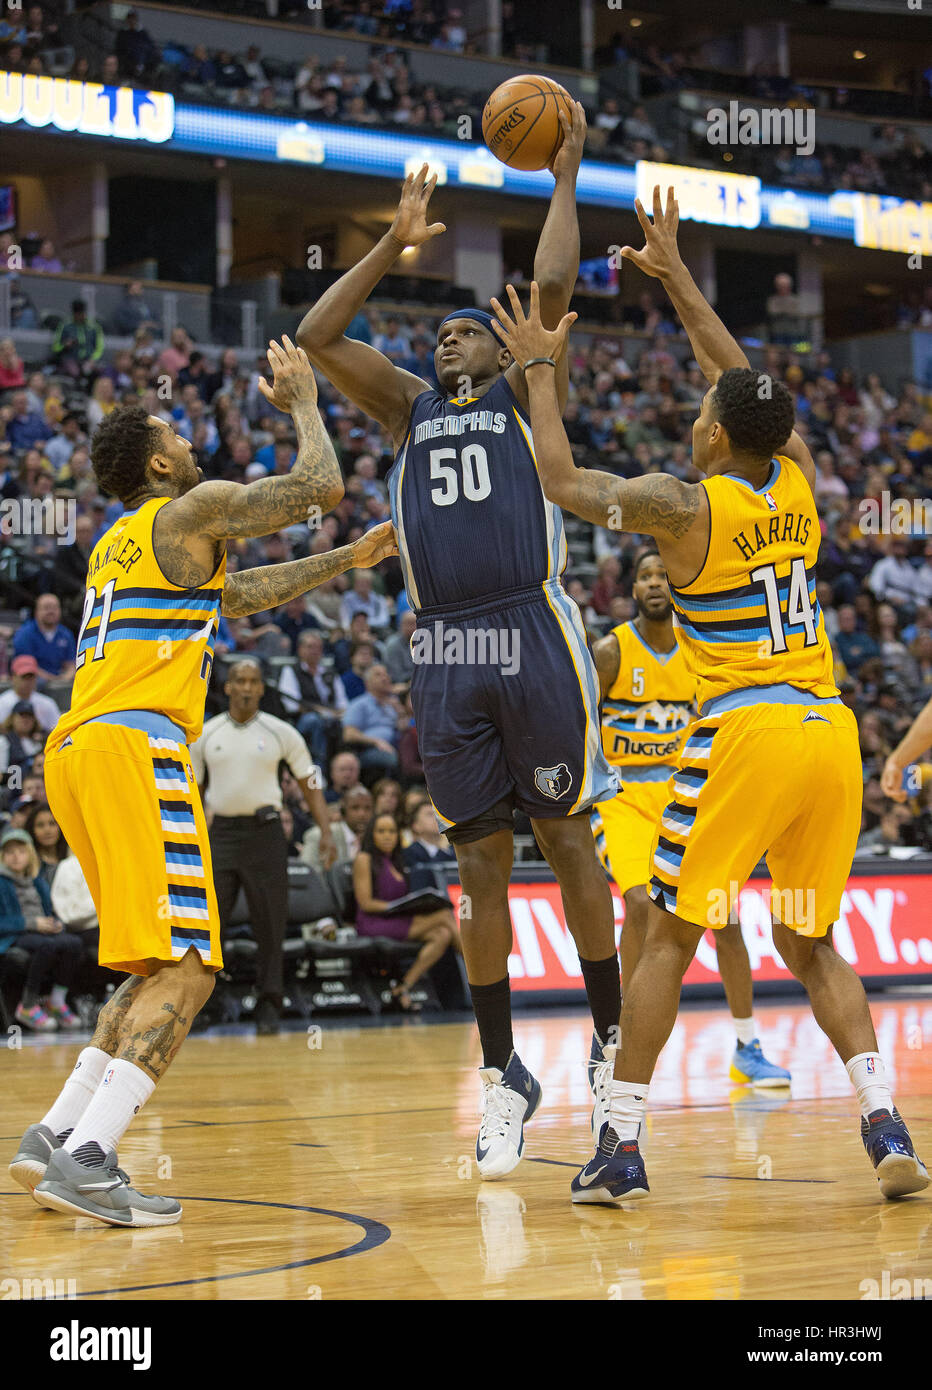 Denver, Colorado, USA. 26th Feb, 2017. Grizzlies ZACH RANDOLPH, center, drives to the basket with Nuggets WILSON CHANDLER, left, and GARY HARRIS, right, during the 2nd. Half at the Pepsi Center Sunday afternoon. The Grizzlies beat the Nuggets 105-98. Credit: Hector Acevedo/ZUMA Wire/Alamy Live News Stock Photo